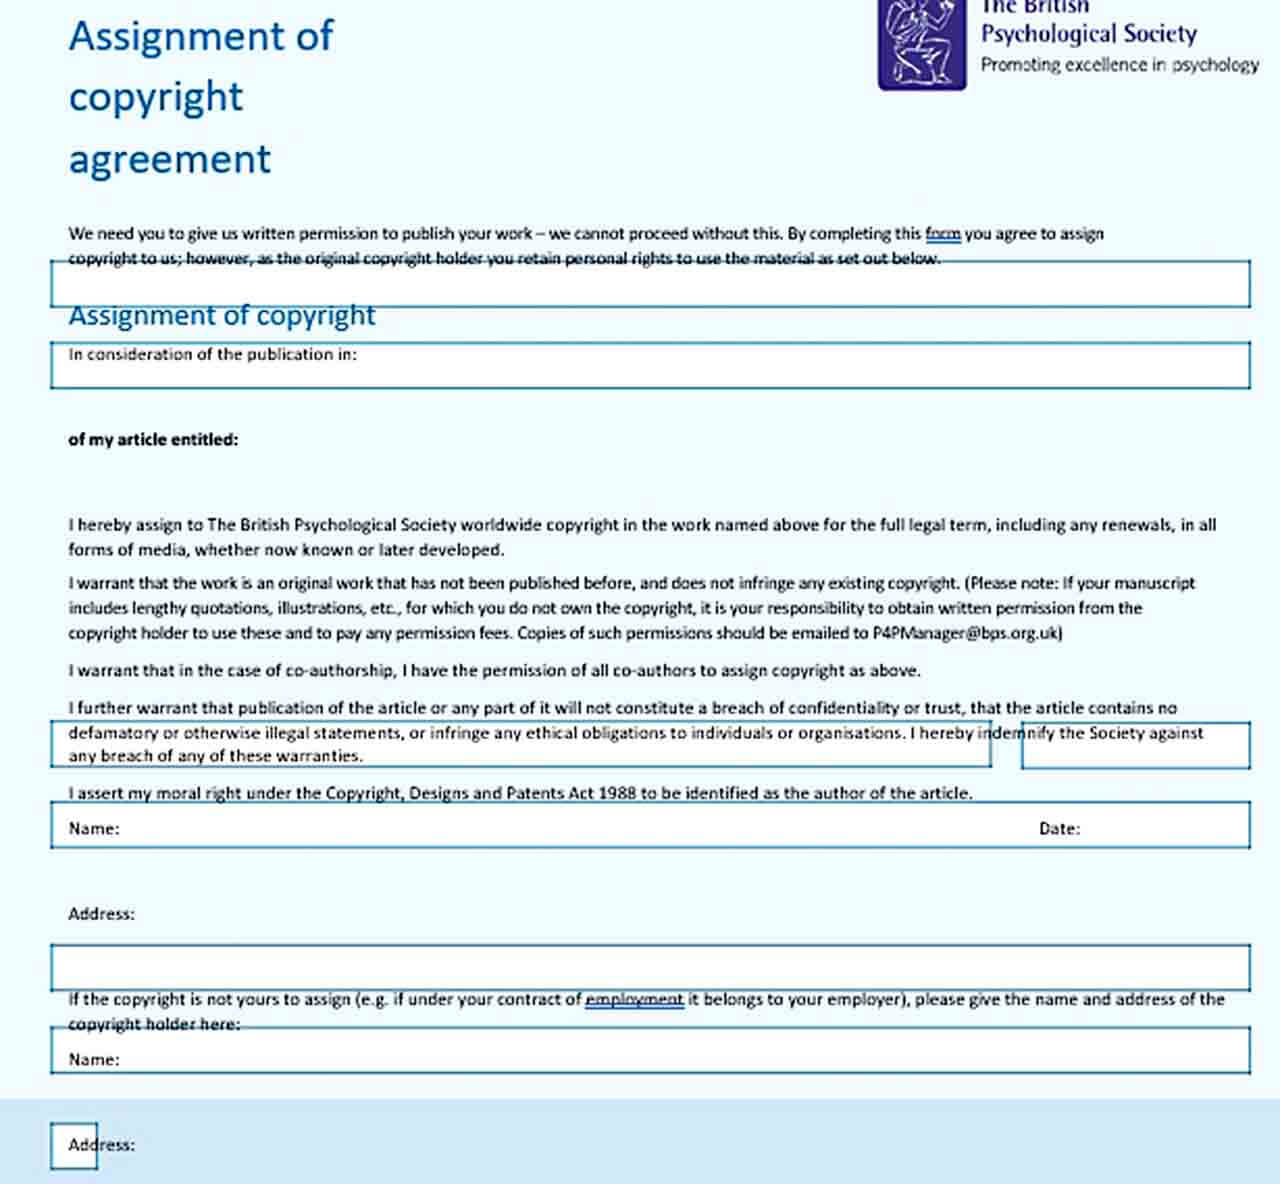 Sample Assignment of Copyright Agreement